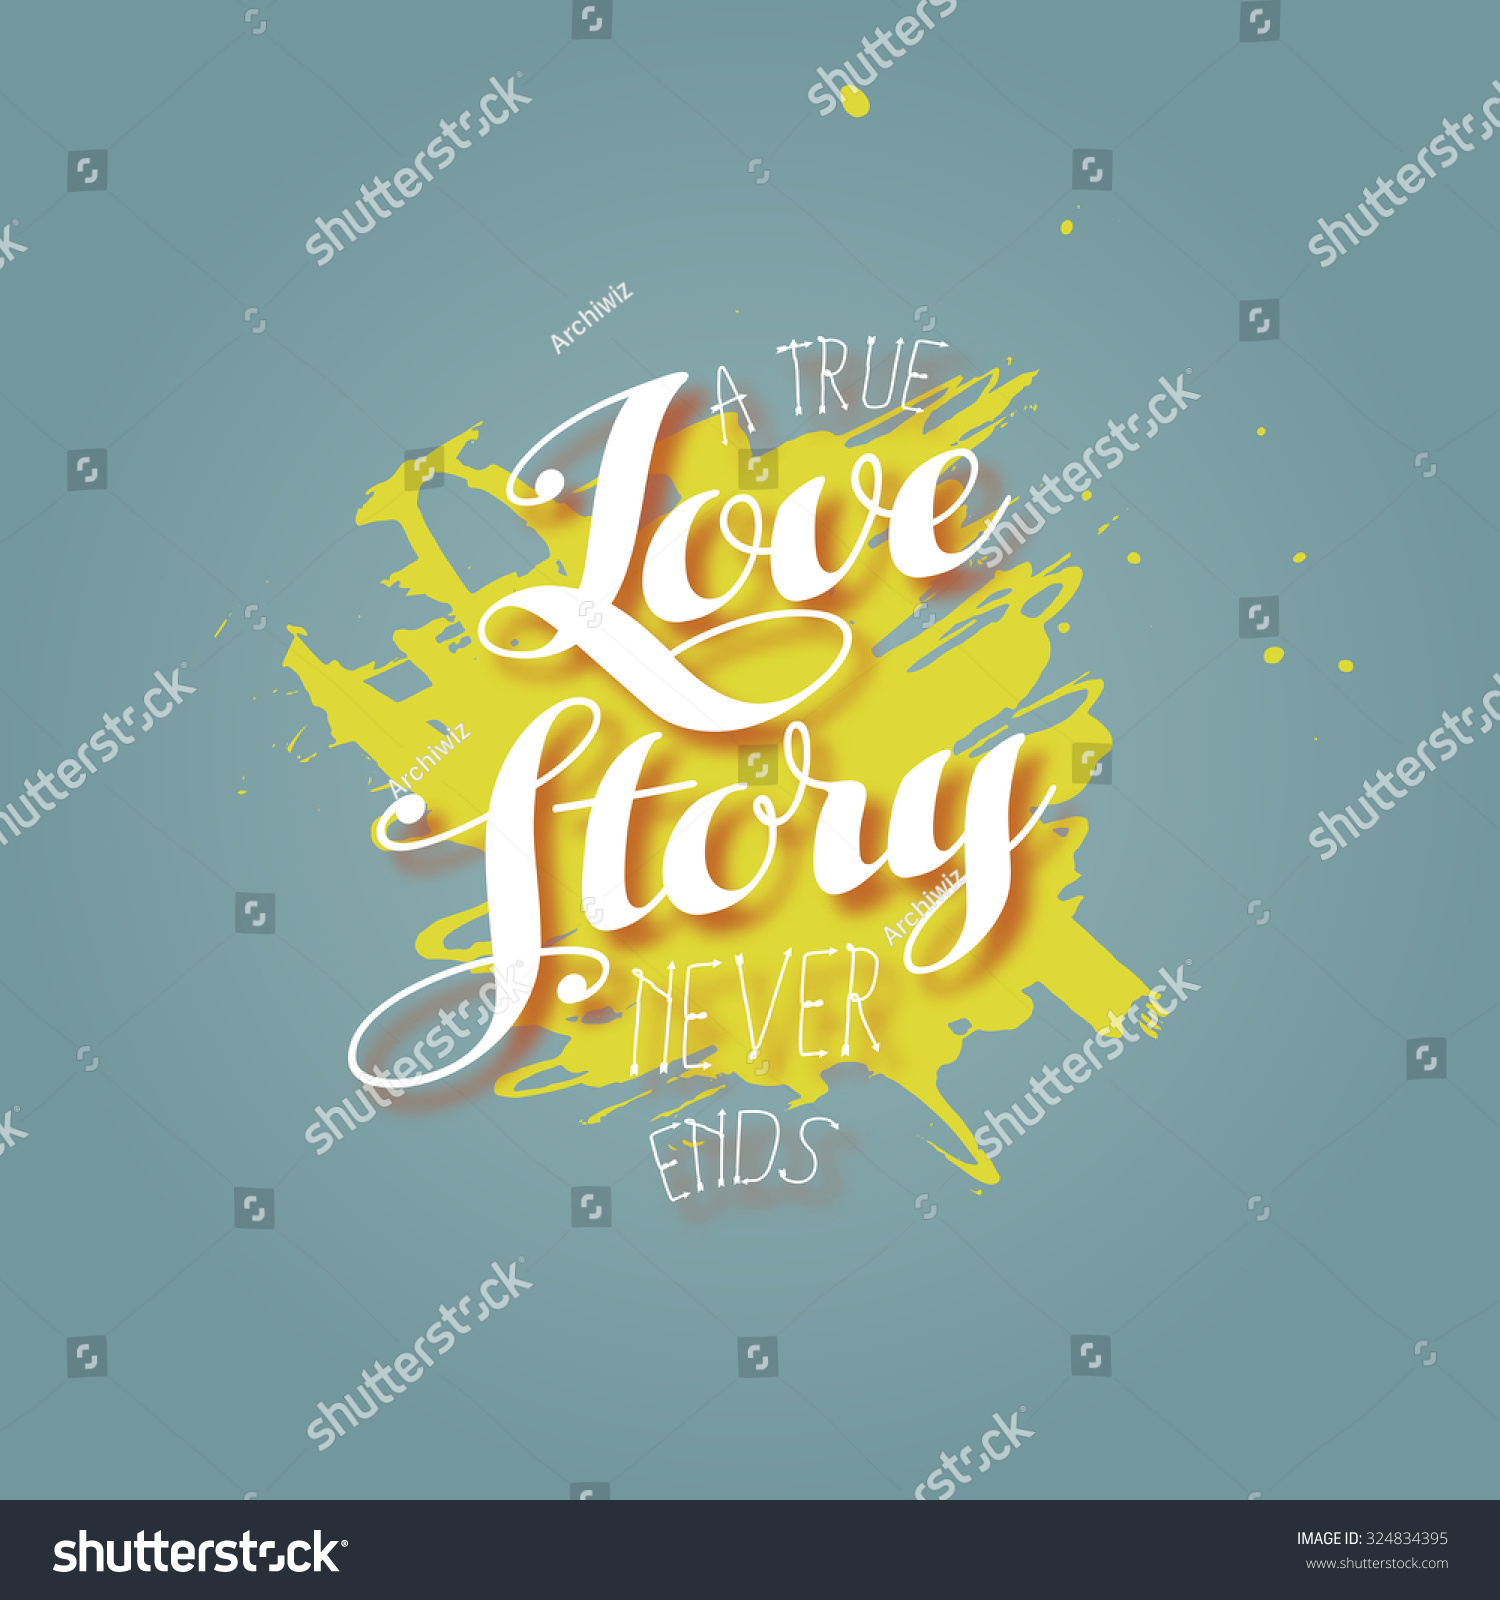 "A true love story never ends" motivational quote Typographical valentines background Vector "